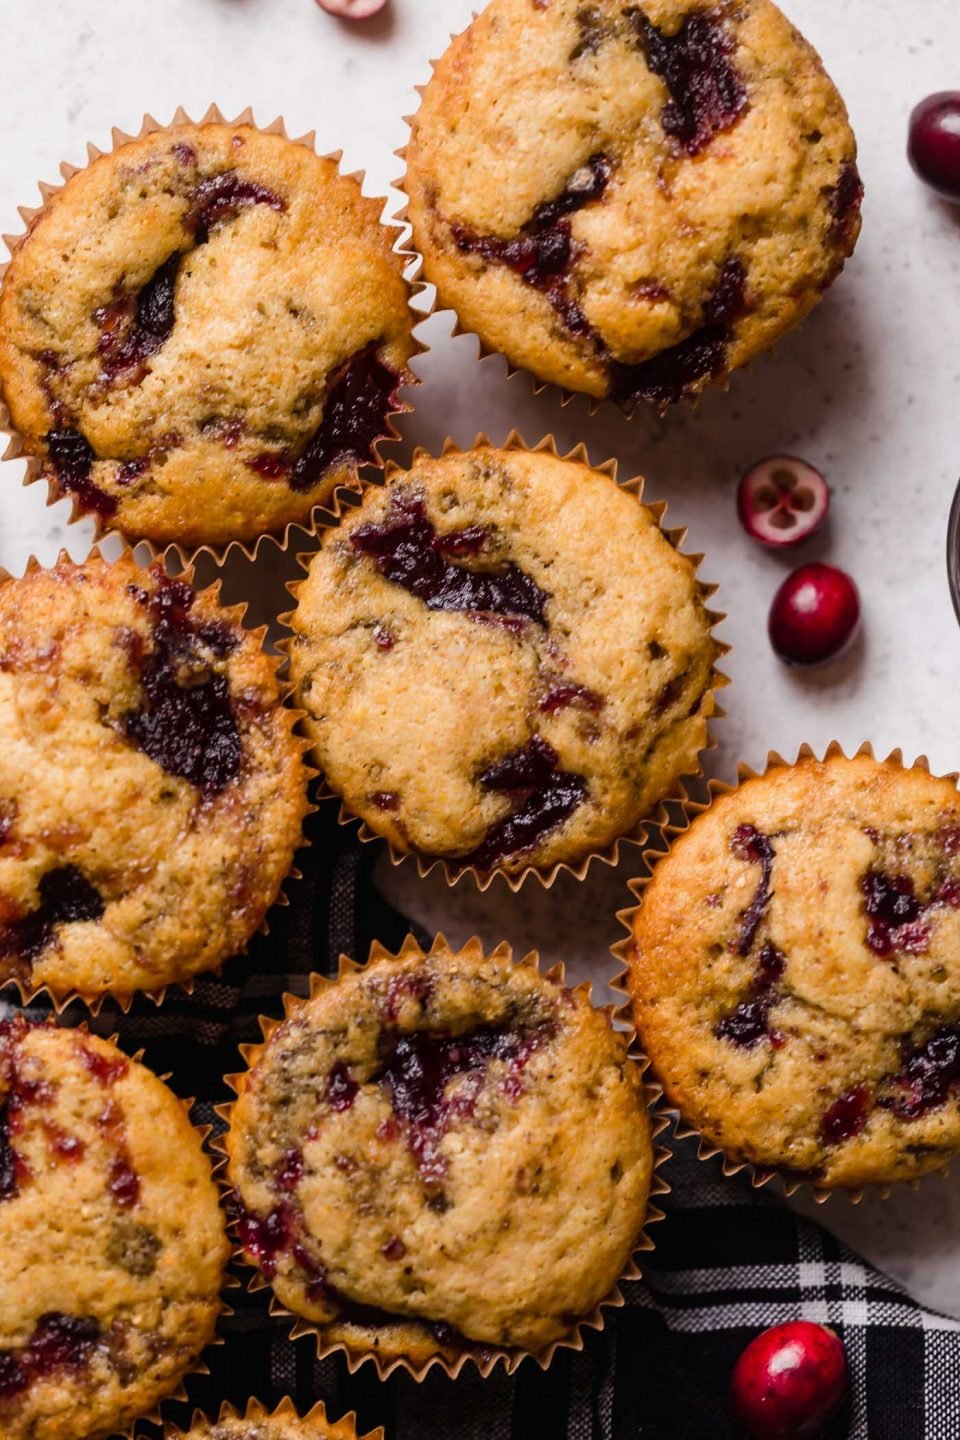 Swirled cranberry cornbread muffins shown on top of a black plaid napkin atop a white surface. Some fresh cranberries are scattered around the muffins.